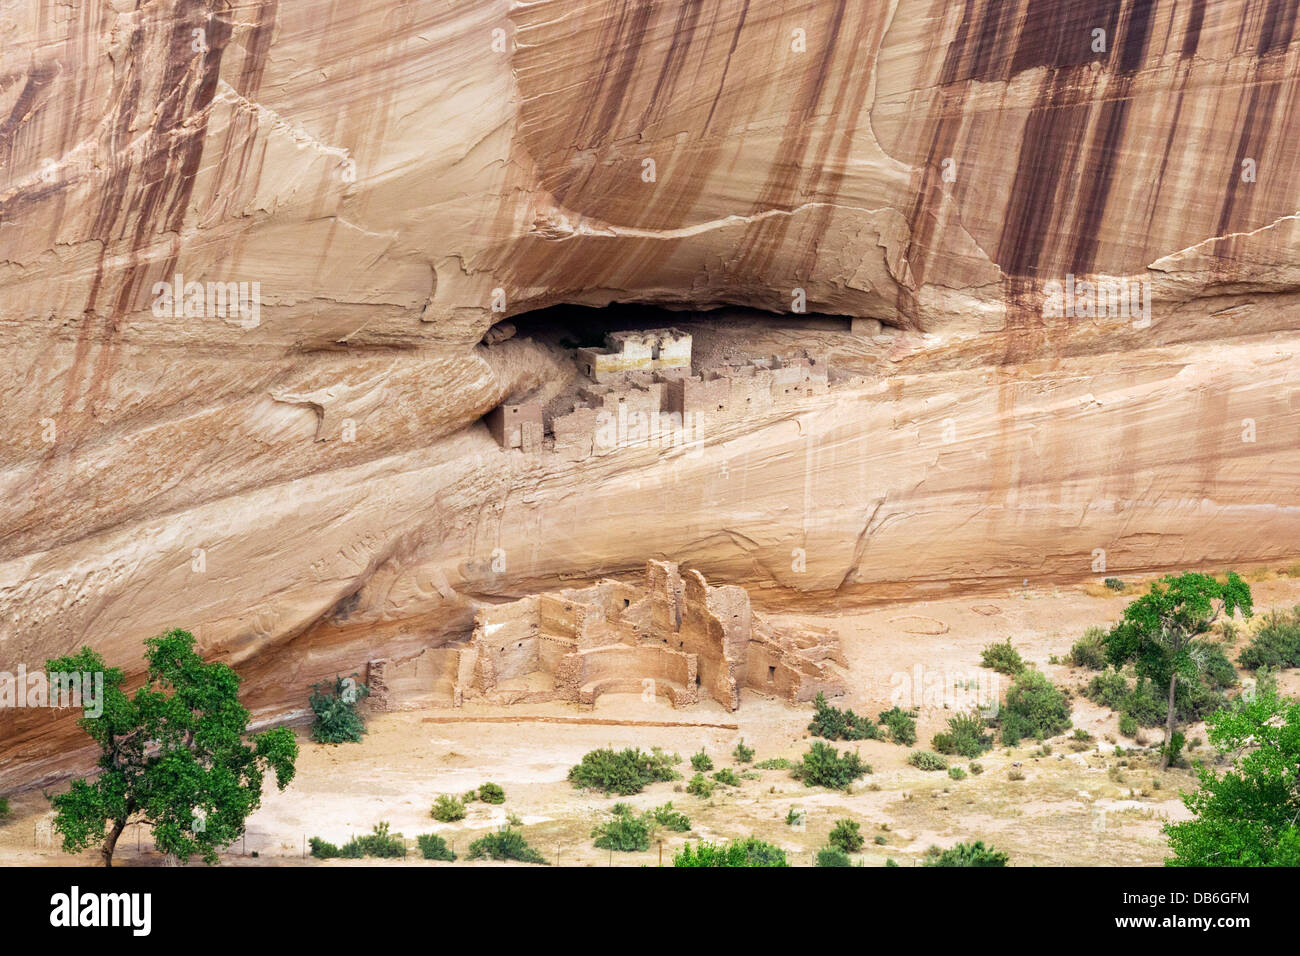 The White House, ancient Pueblo Indian cliff dwelling, viewed from South Rim, Canyon de Chelly National Monument, Arizona, USA Stock Photo